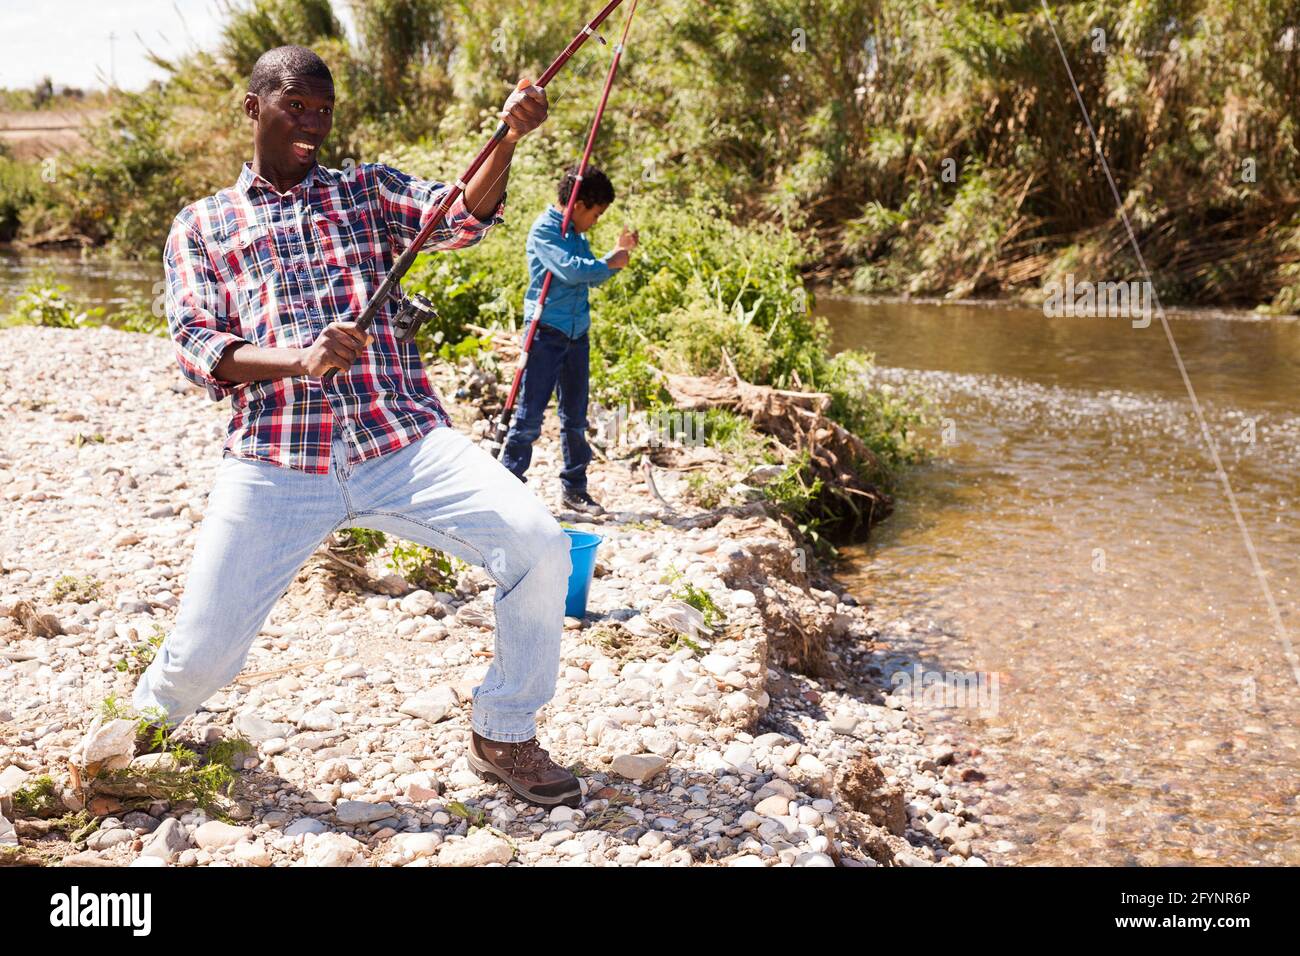 Portrait of Afro man pulling fish with fishing rod and his son fishing on river Stock Photo